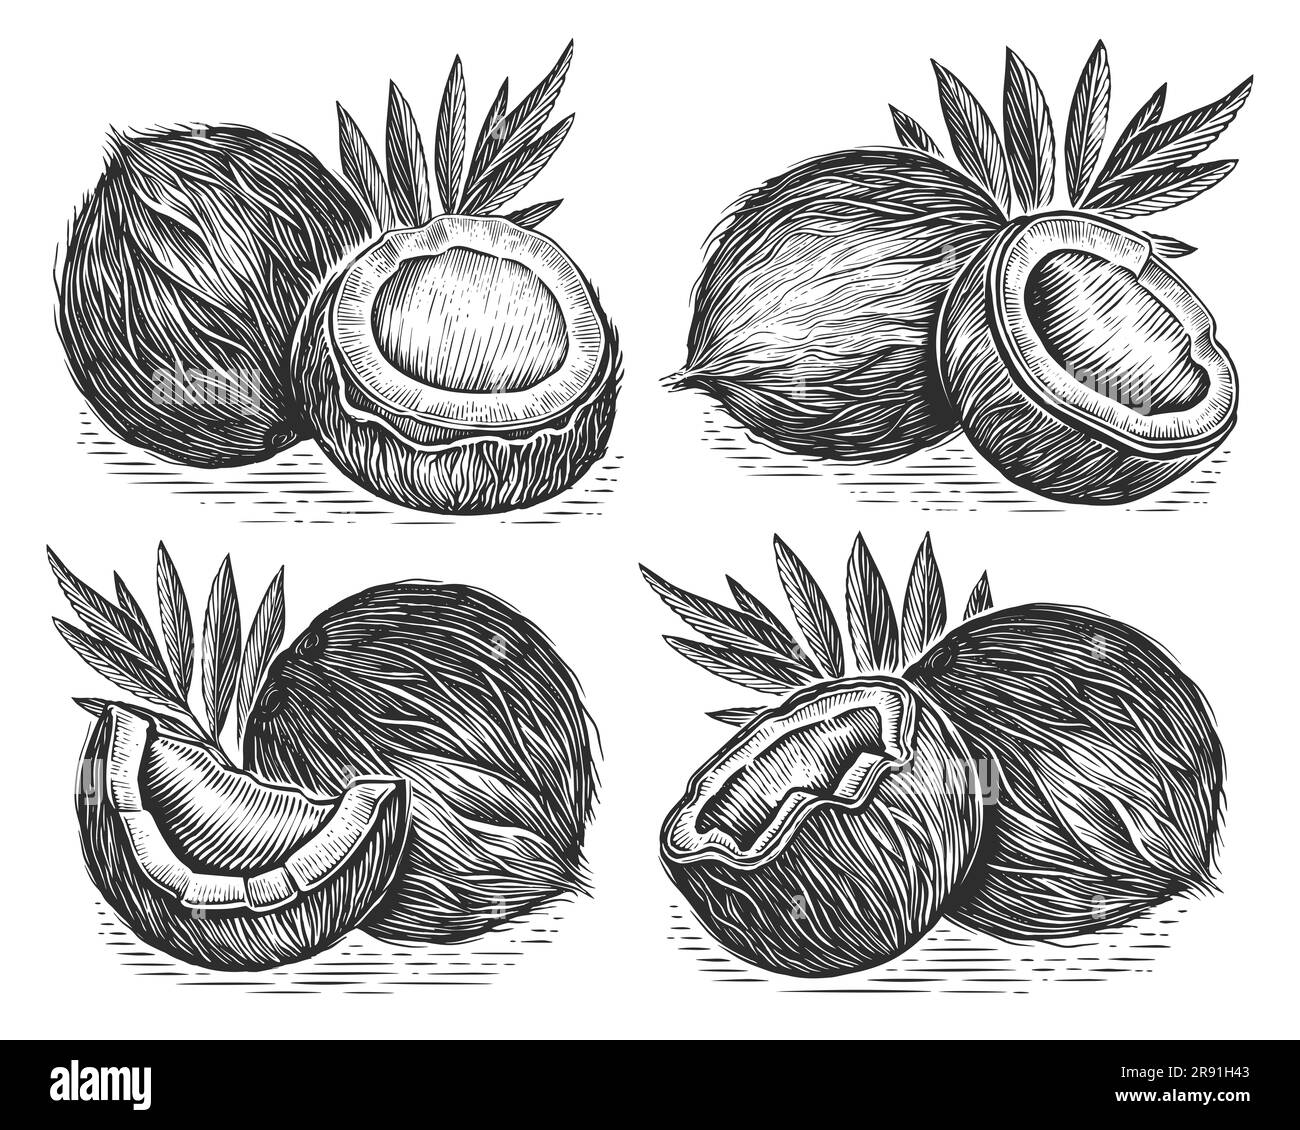 Coconuts with leaves, set drawn in sketch style. Tropical food illustration Stock Photo